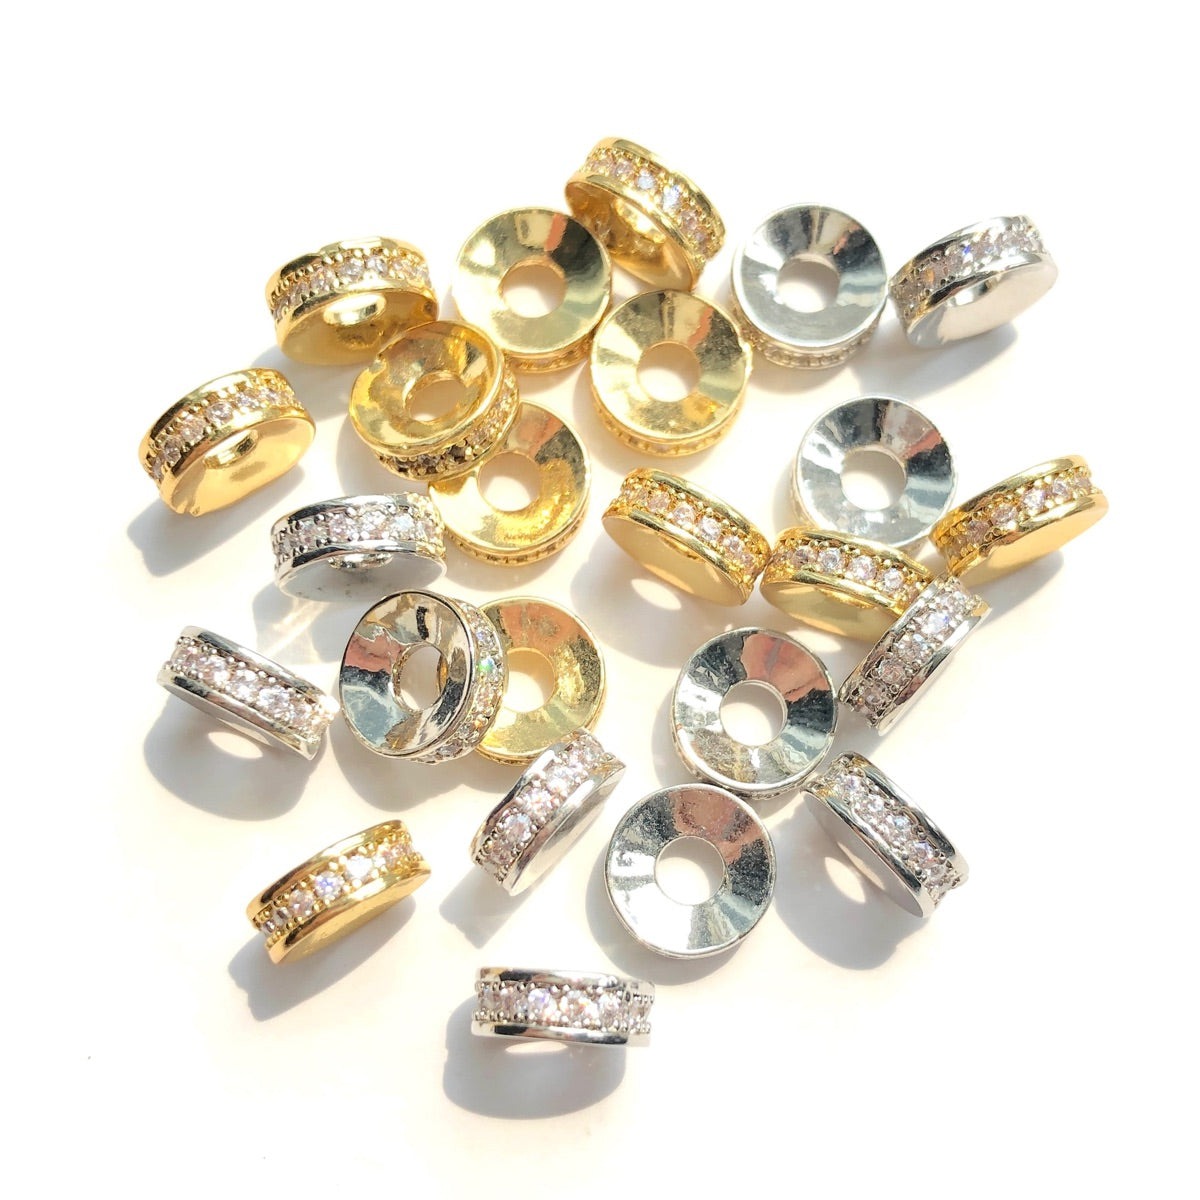 20-50pcs/lot 8*3mm CZ Paved Rondelle Wheel Spacers Mix Colors CZ Paved Spacers Big Hole Beads New Spacers Arrivals Rondelle Beads Wholesale Charms Beads Beyond